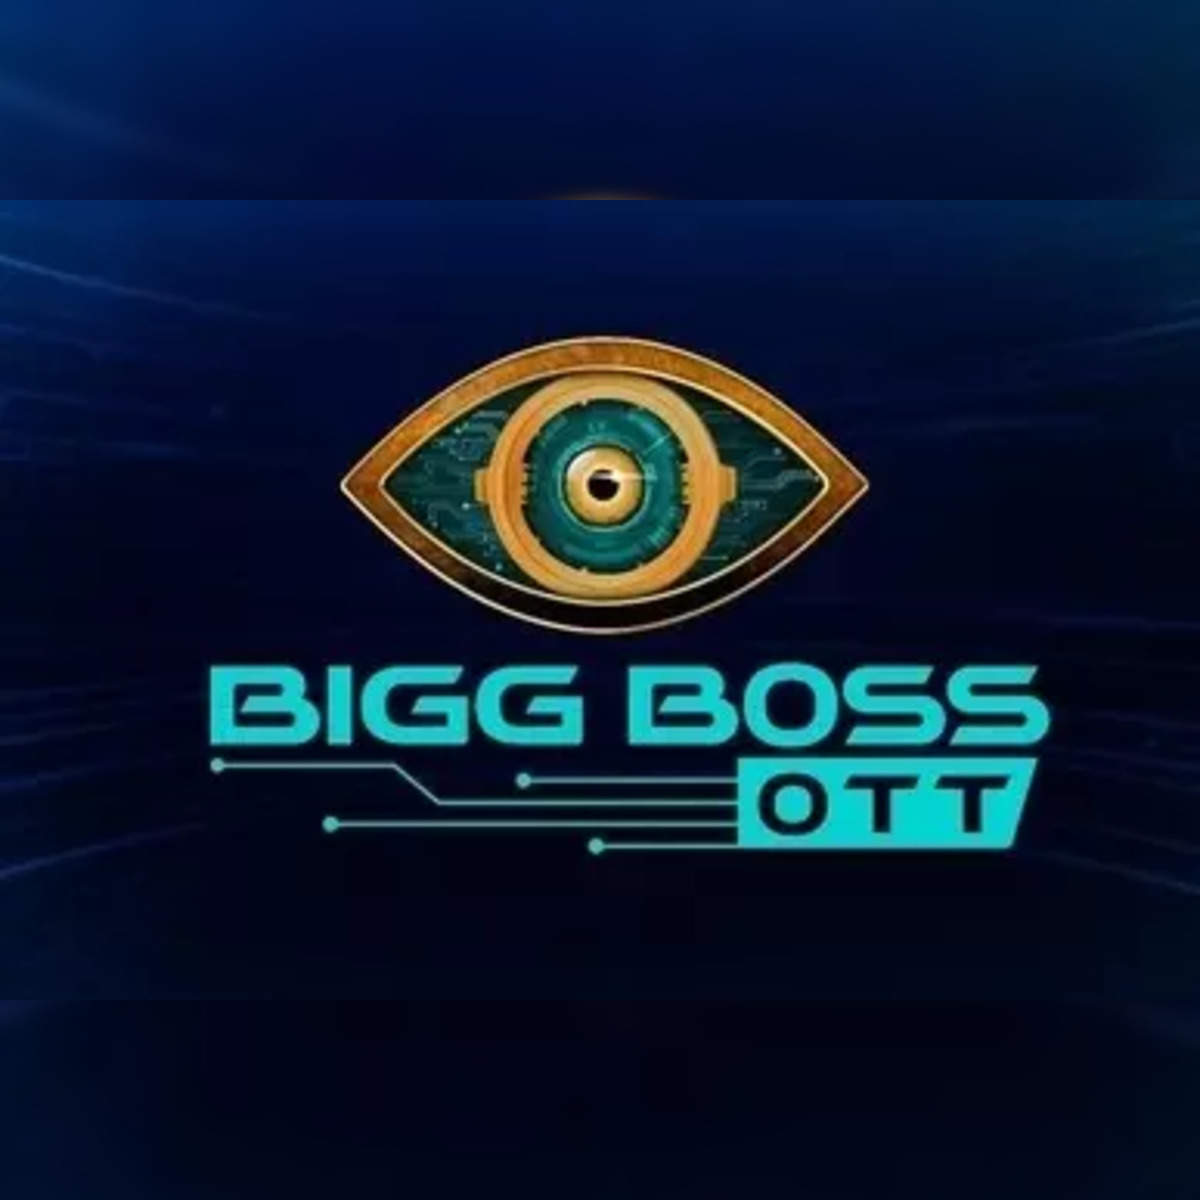 Big Brother Eye Logo For The 16th Anglosovic Series - Bigg Boss 6 Kannada  PNG Image | Transparent PNG Free Download on SeekPNG